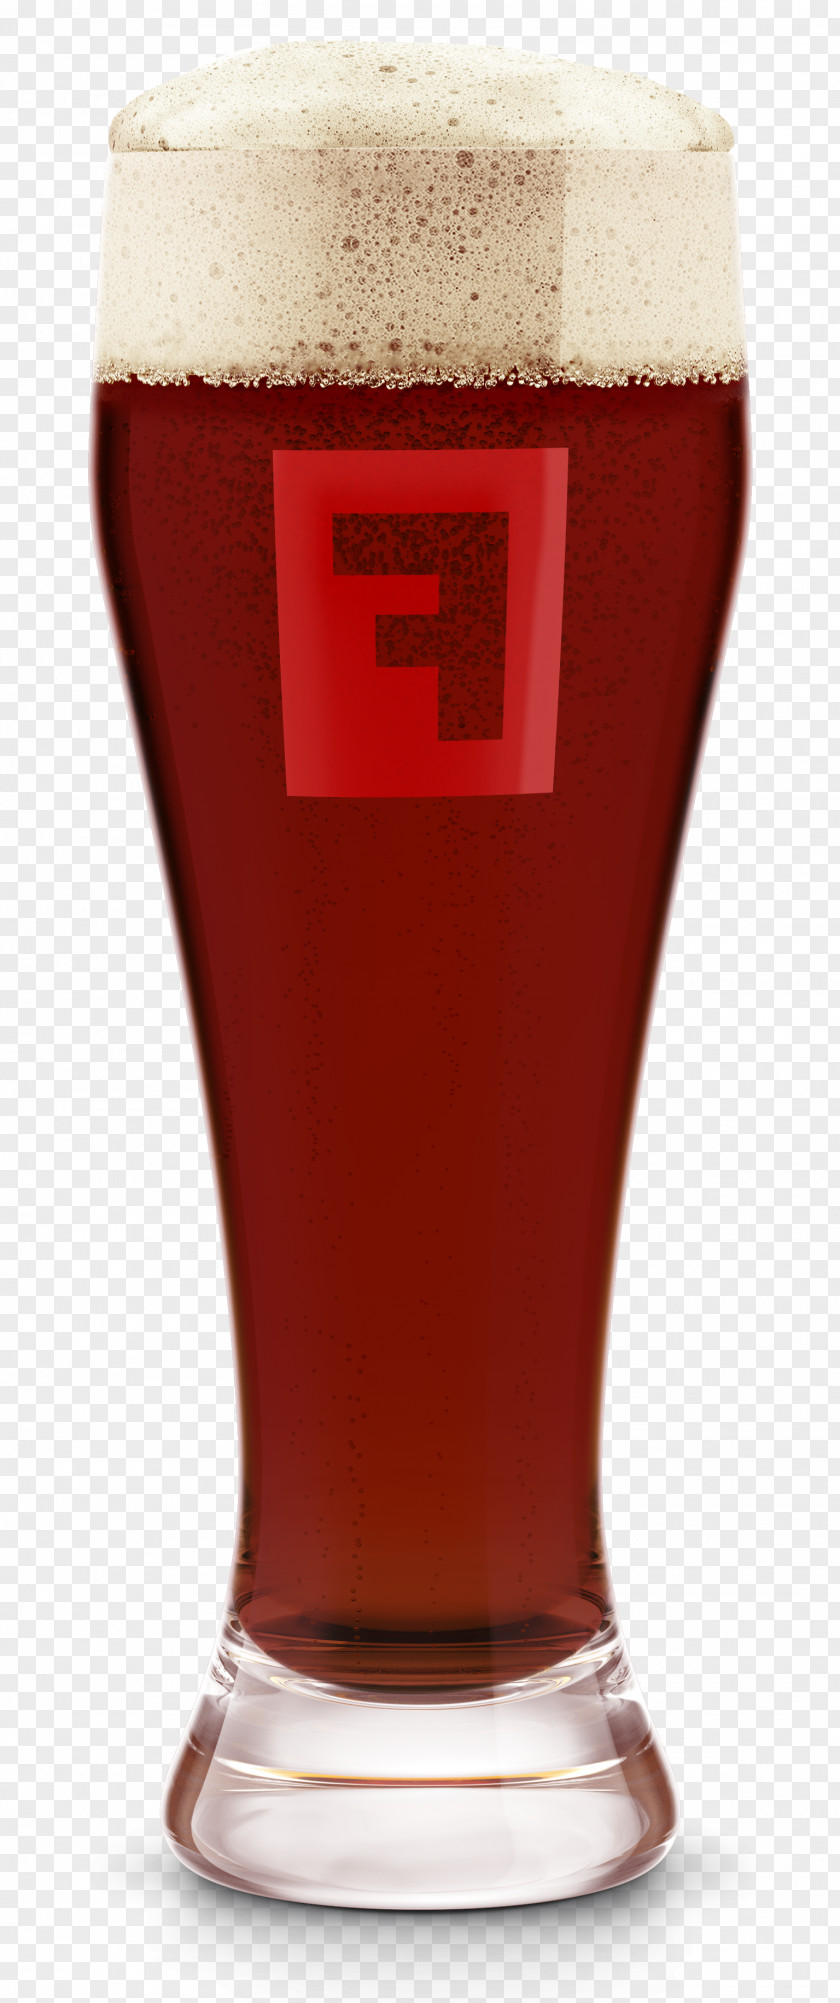 Beer Fullsteam Brewery Pint Glass Vienna Lager PNG